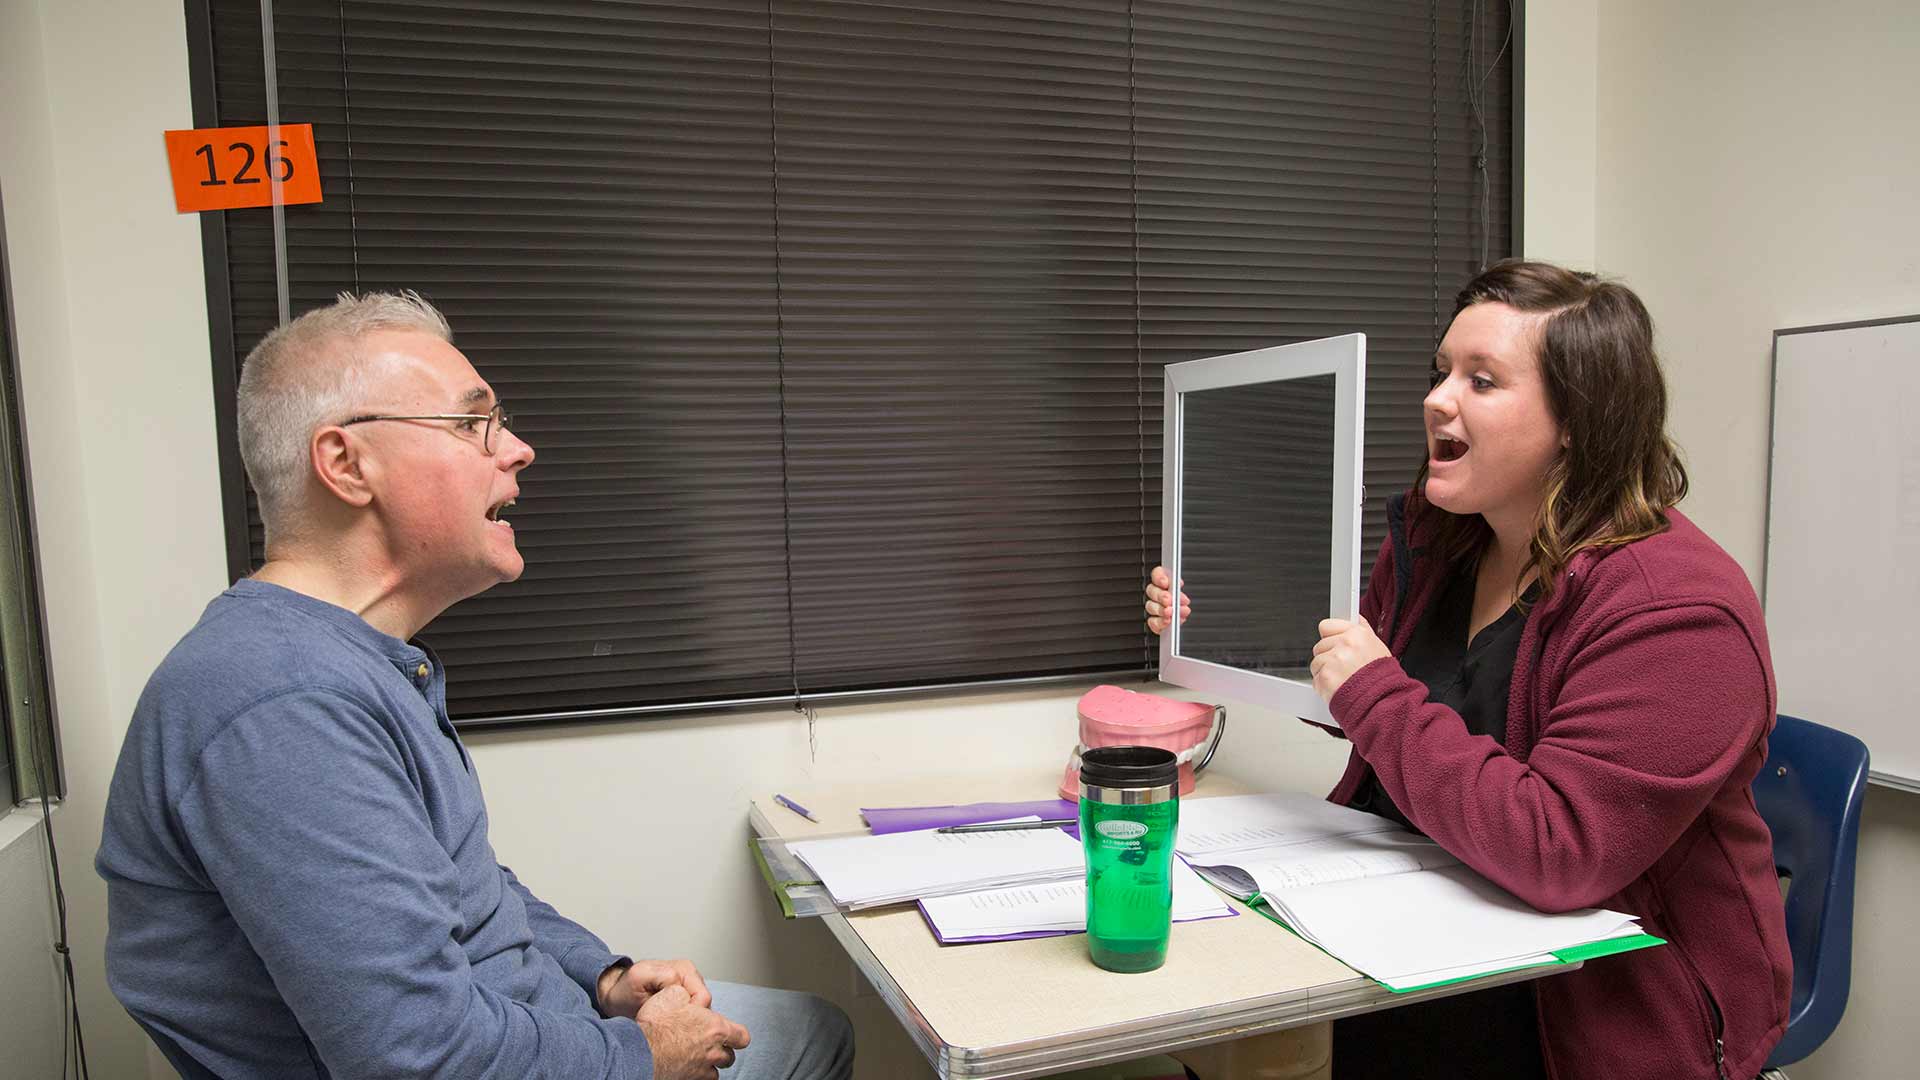 A speech-language student holds up a tablet in front of a client during a therapy session.